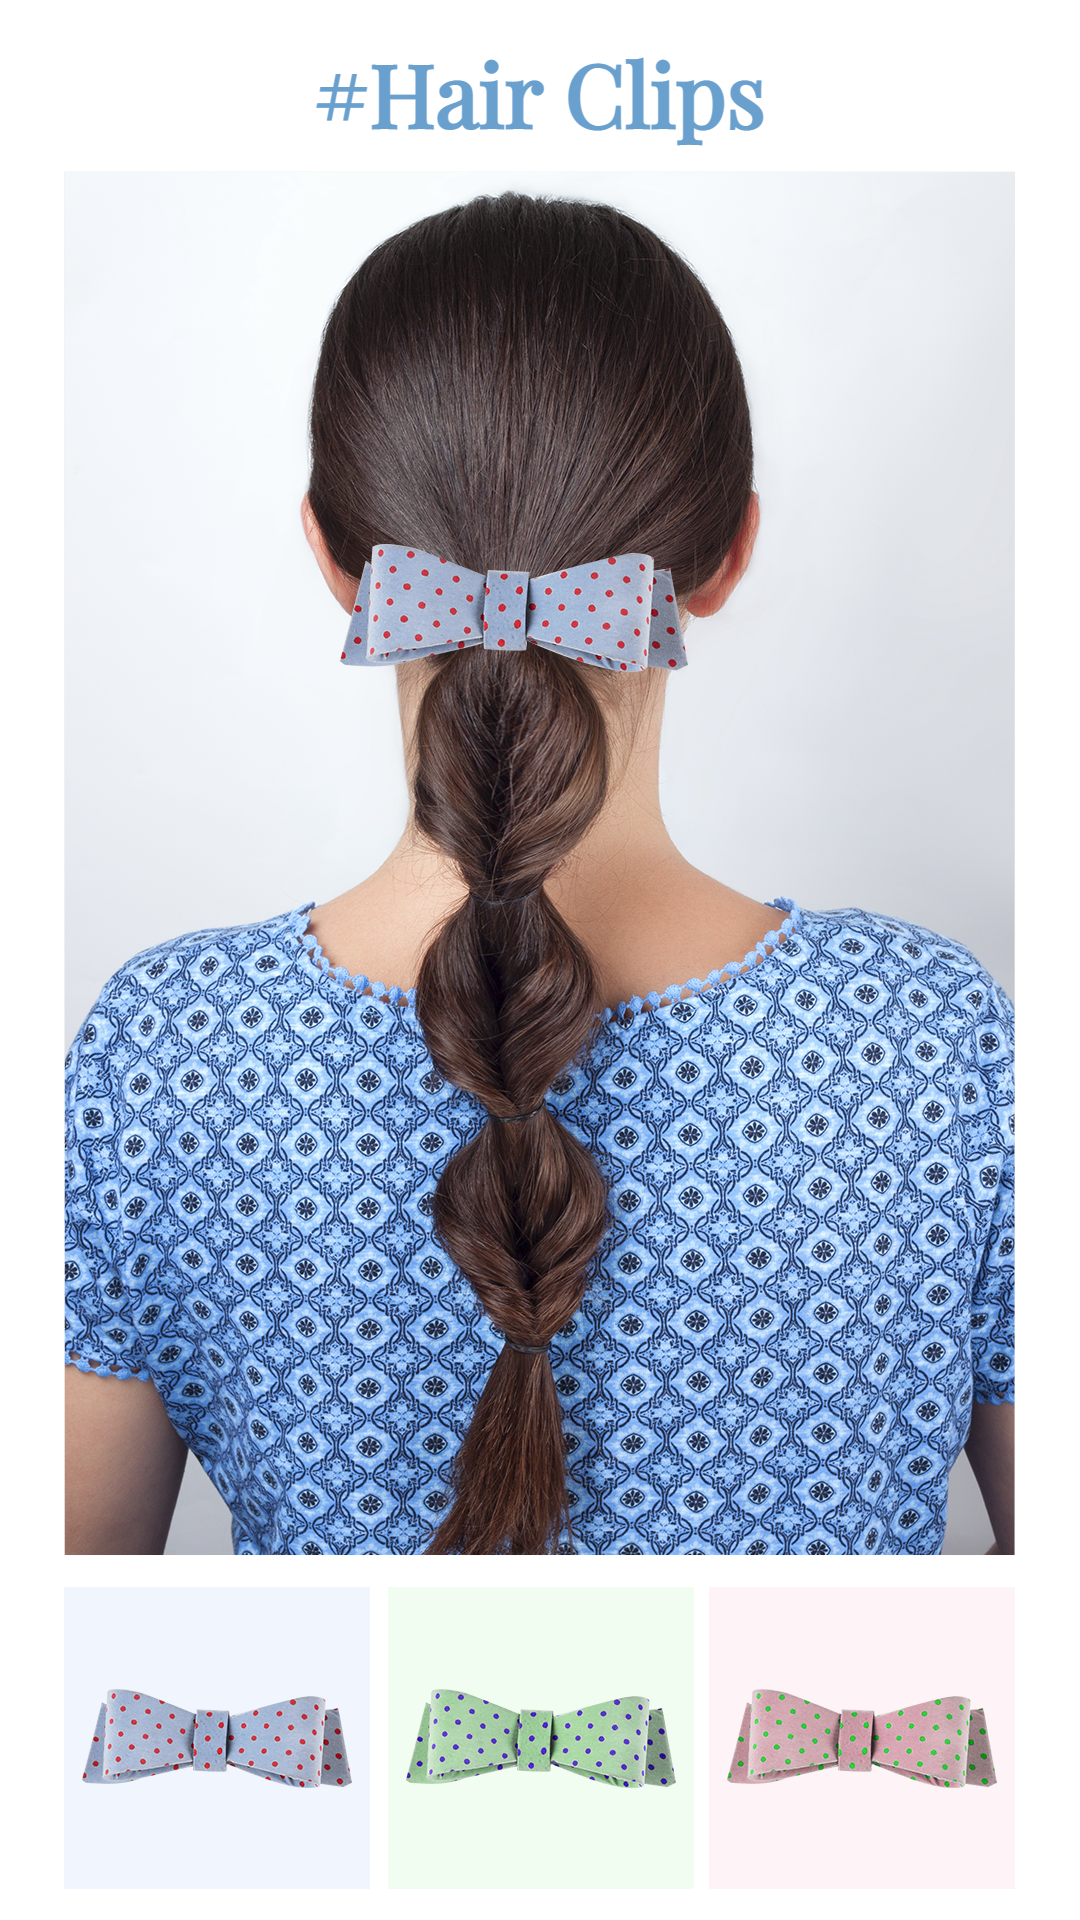 Simple Hair Clips Display Ecommerce Story预览效果